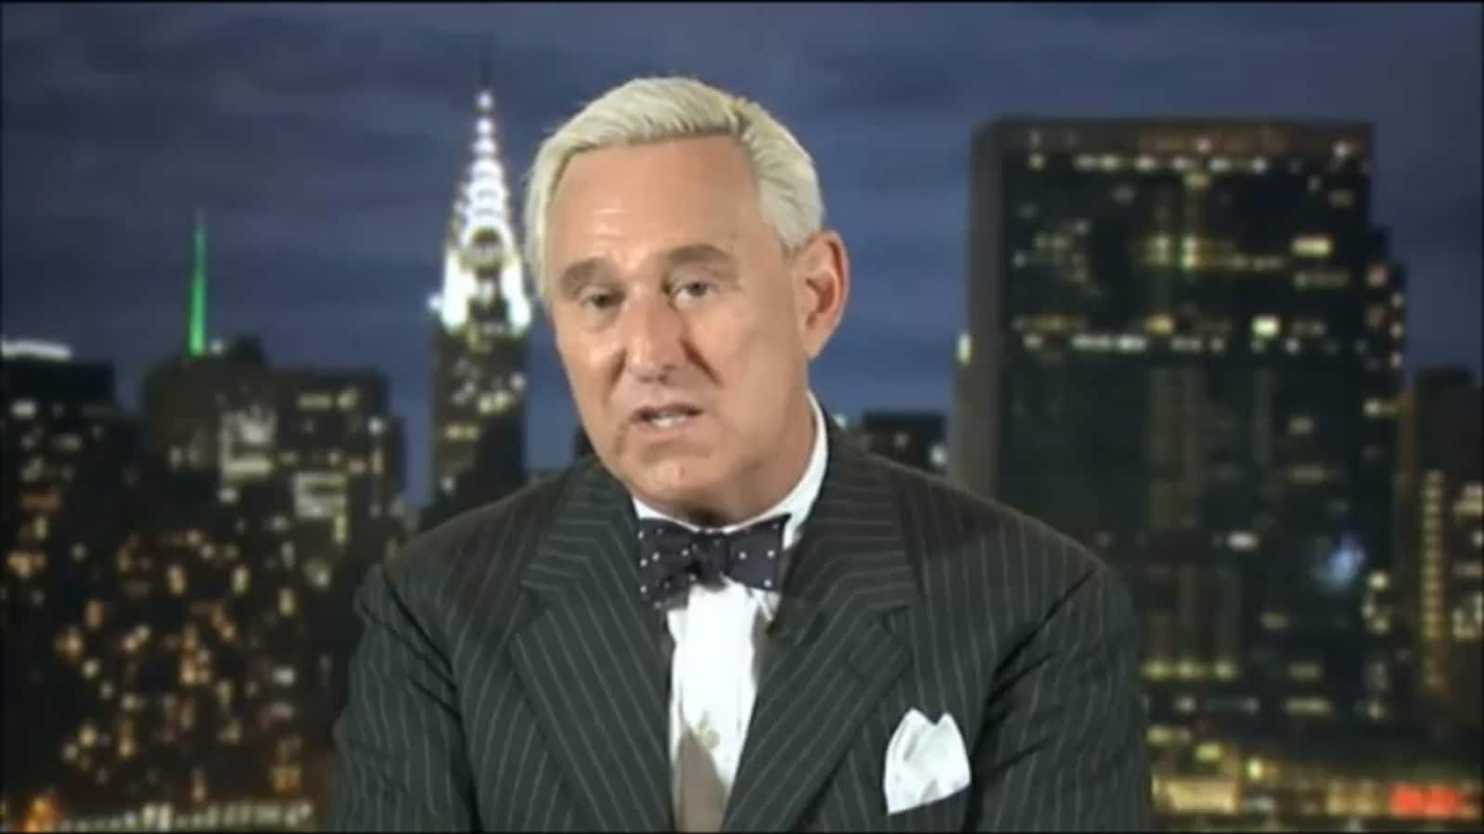 Why is former Donald Trump adviser Roger Stone being blacklisted by the media? - The ...1484 x 834